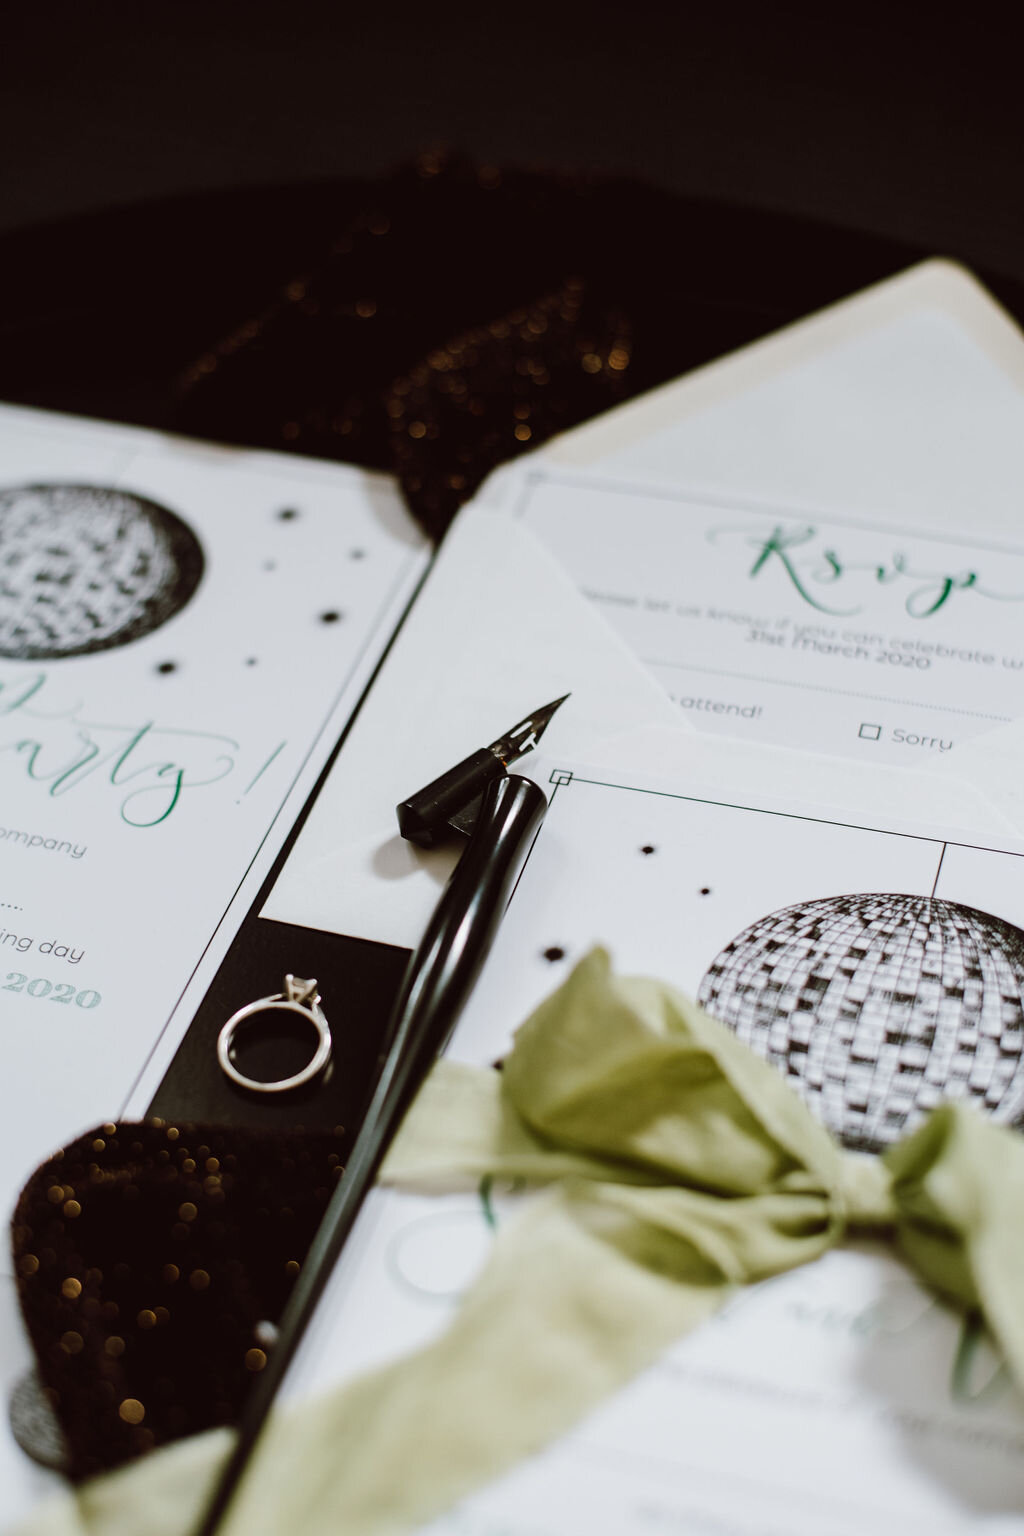 Disco ball invites -  Let's party eco friendly invitations made from recycled paper - Pelham House wedding stationery - forest green.jpg